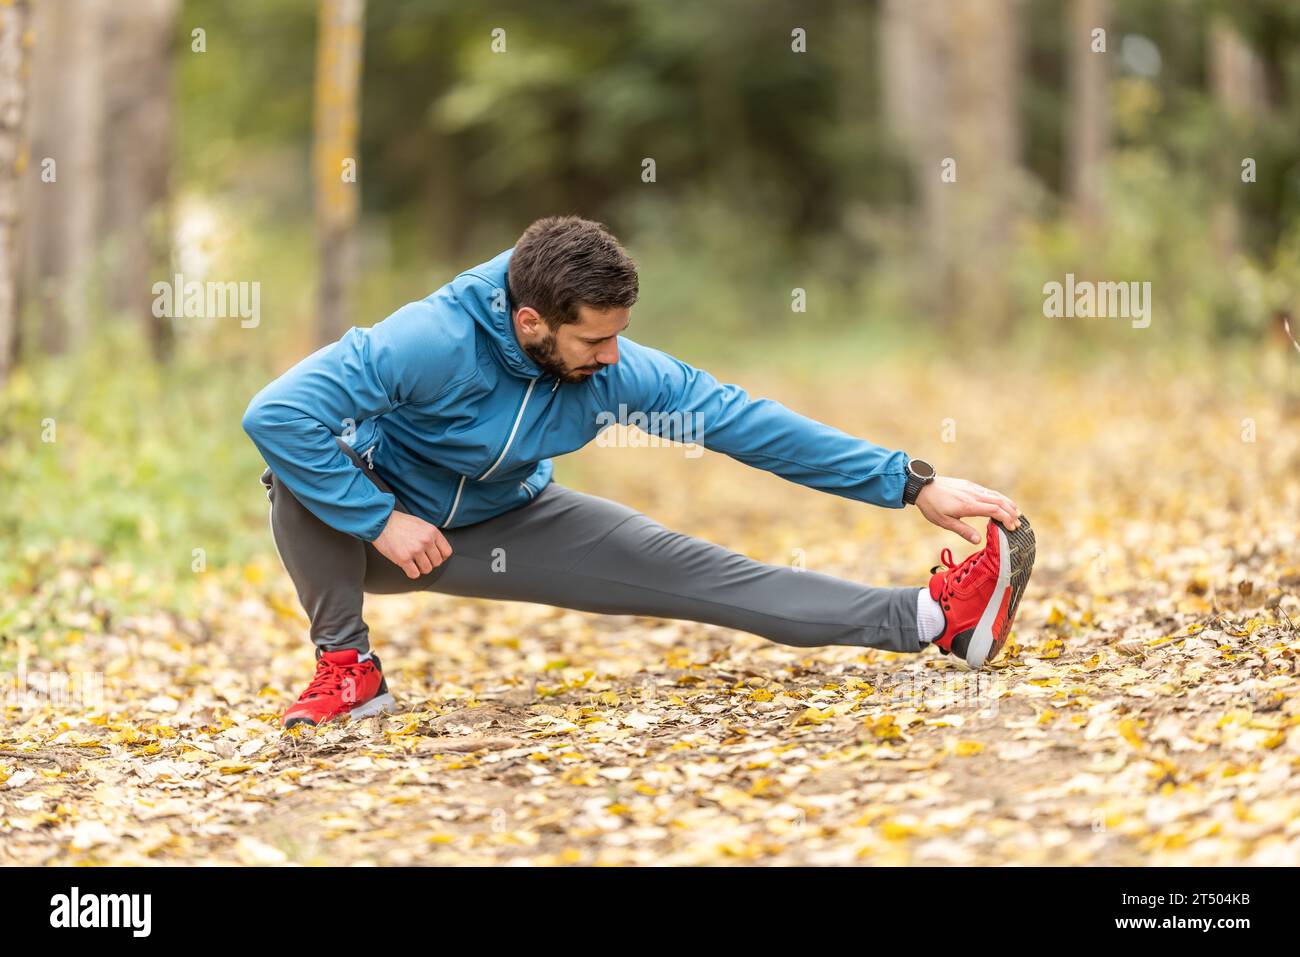 A young athlete is warming up before running training in the park. It warms the lower part of the body. Stock Photo